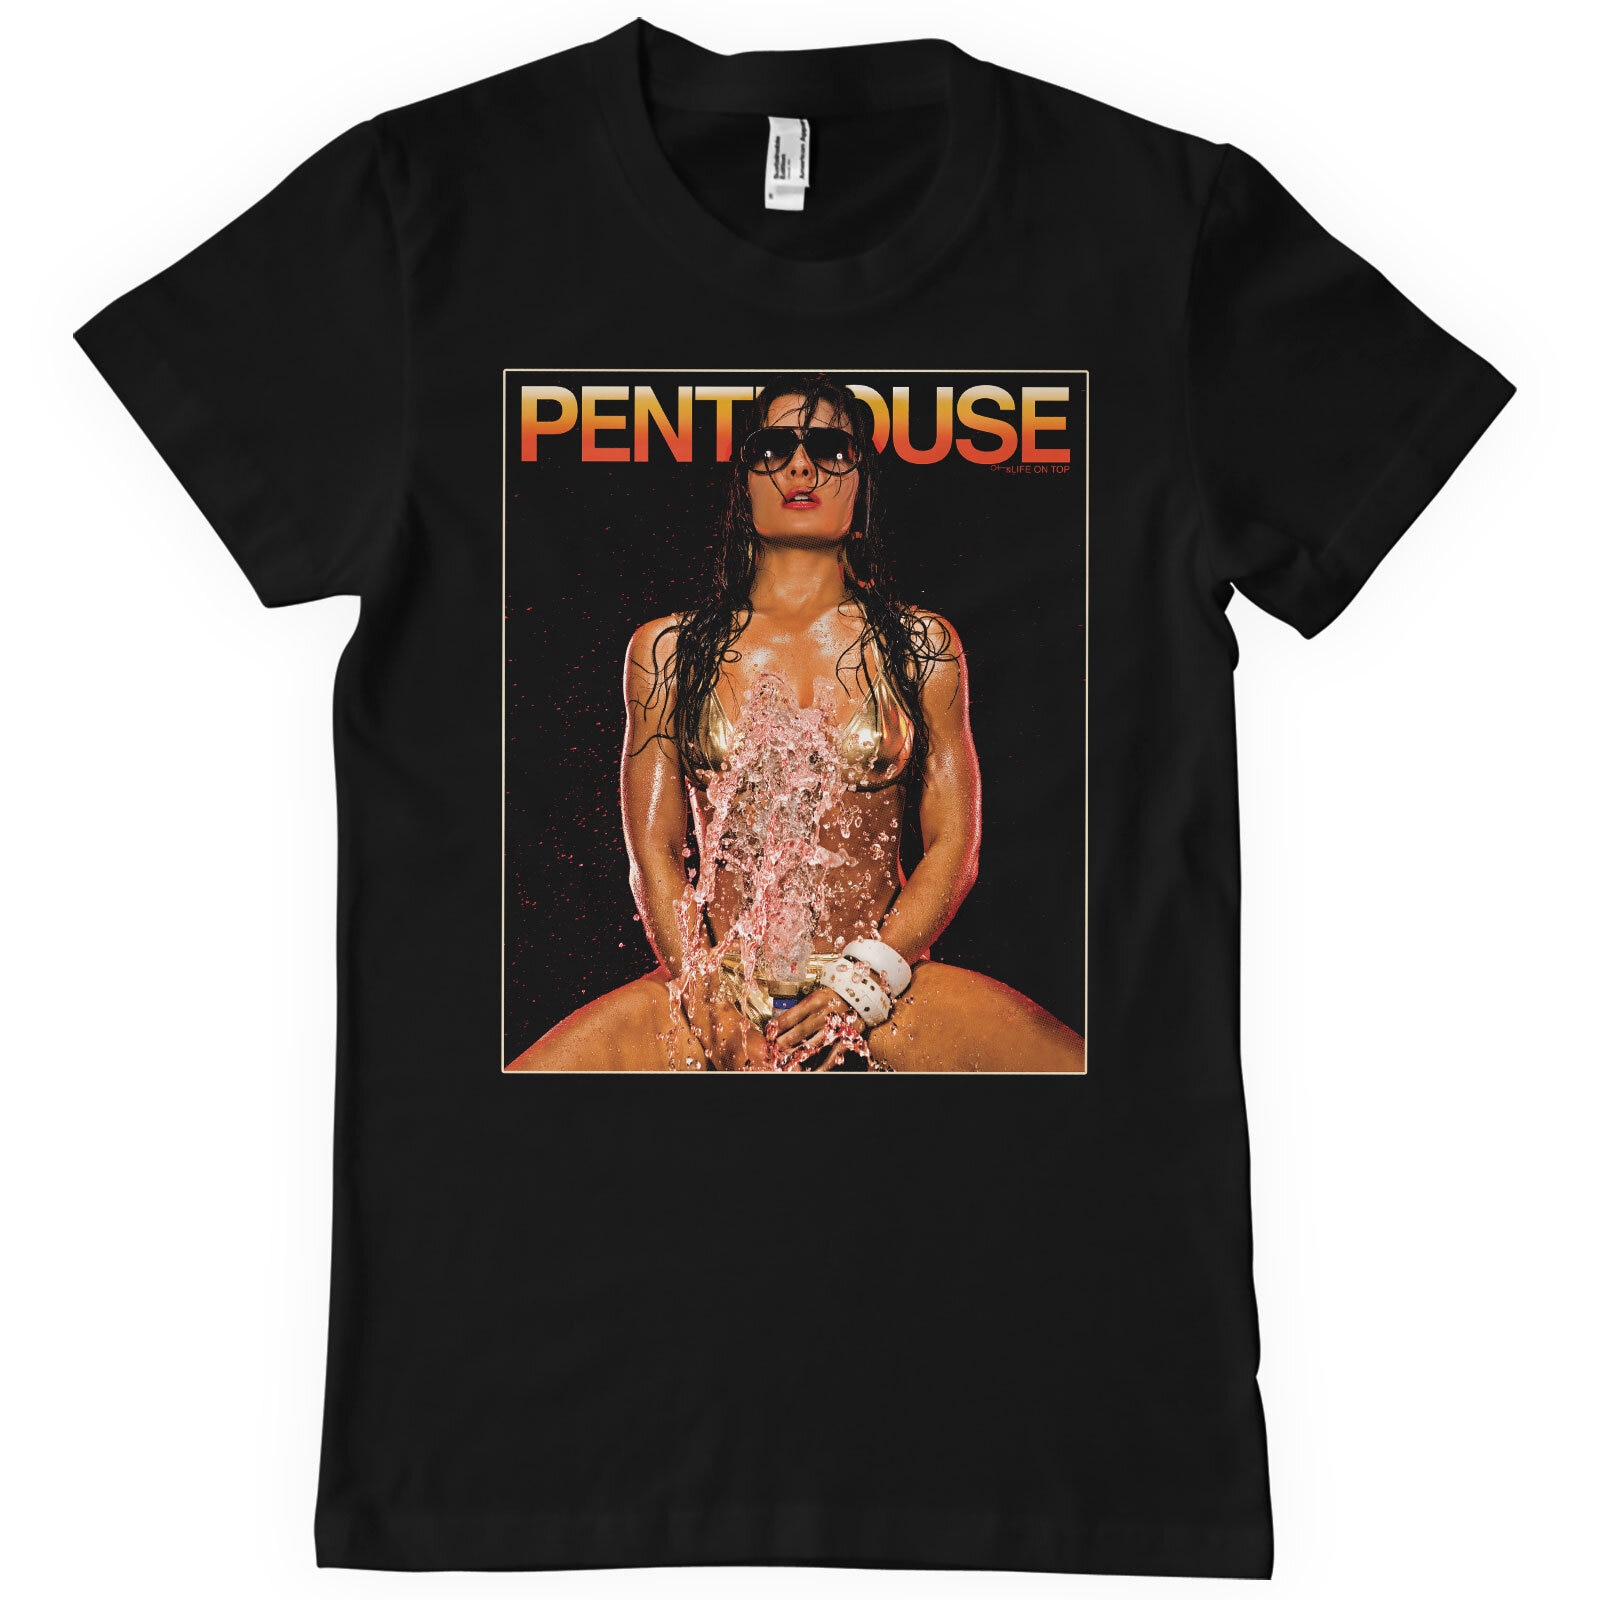 Penthouse August 2007 Cover T-Shirt